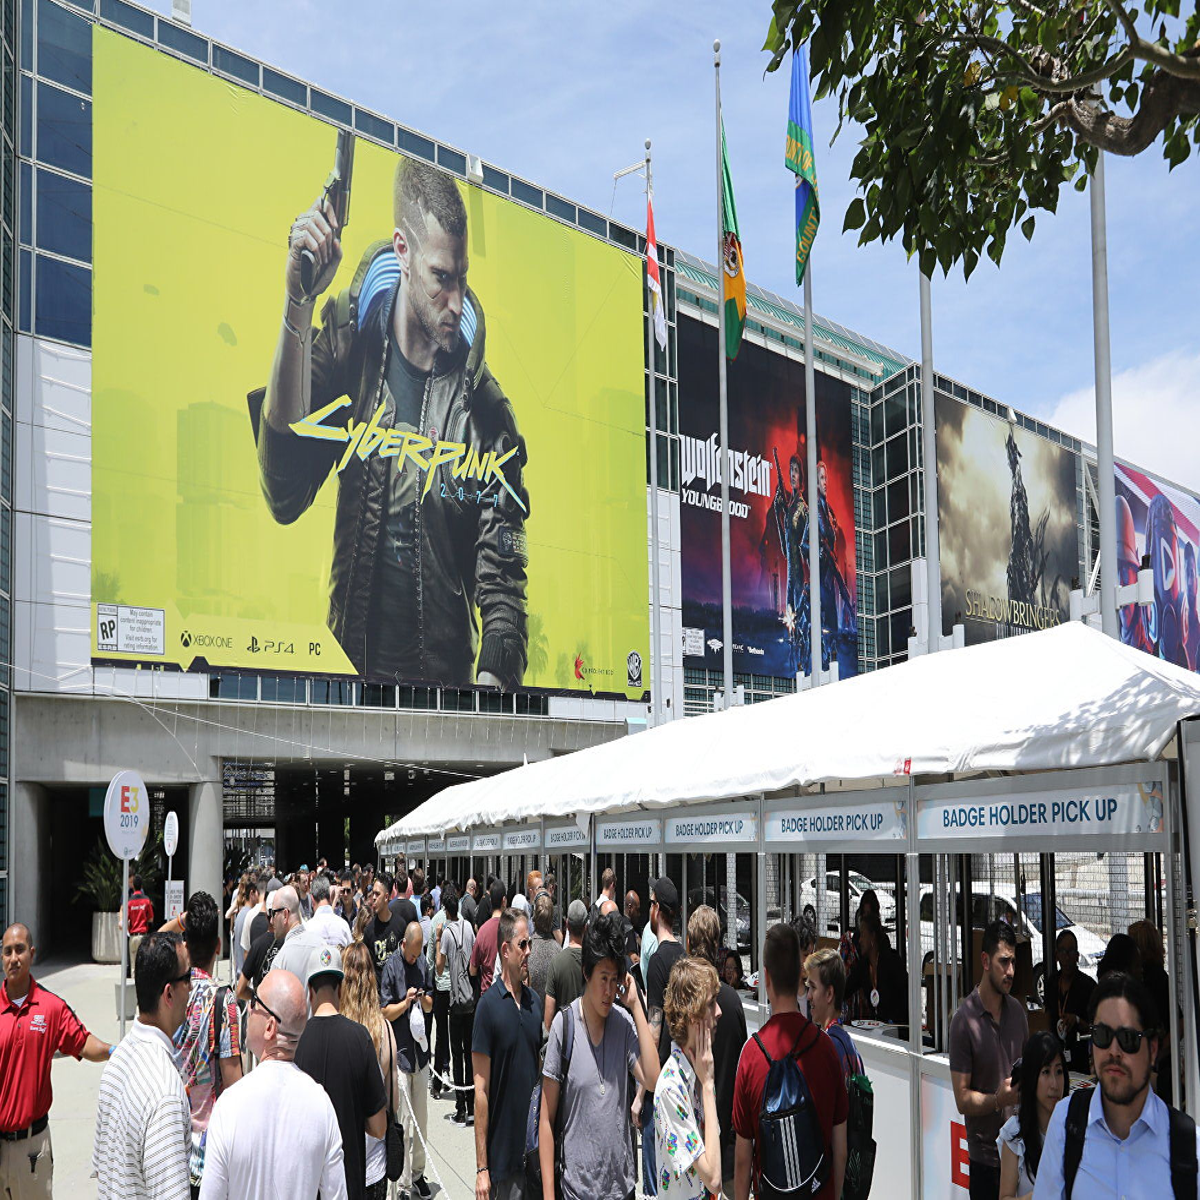 E3 Is Officially Dead, For Real This Time